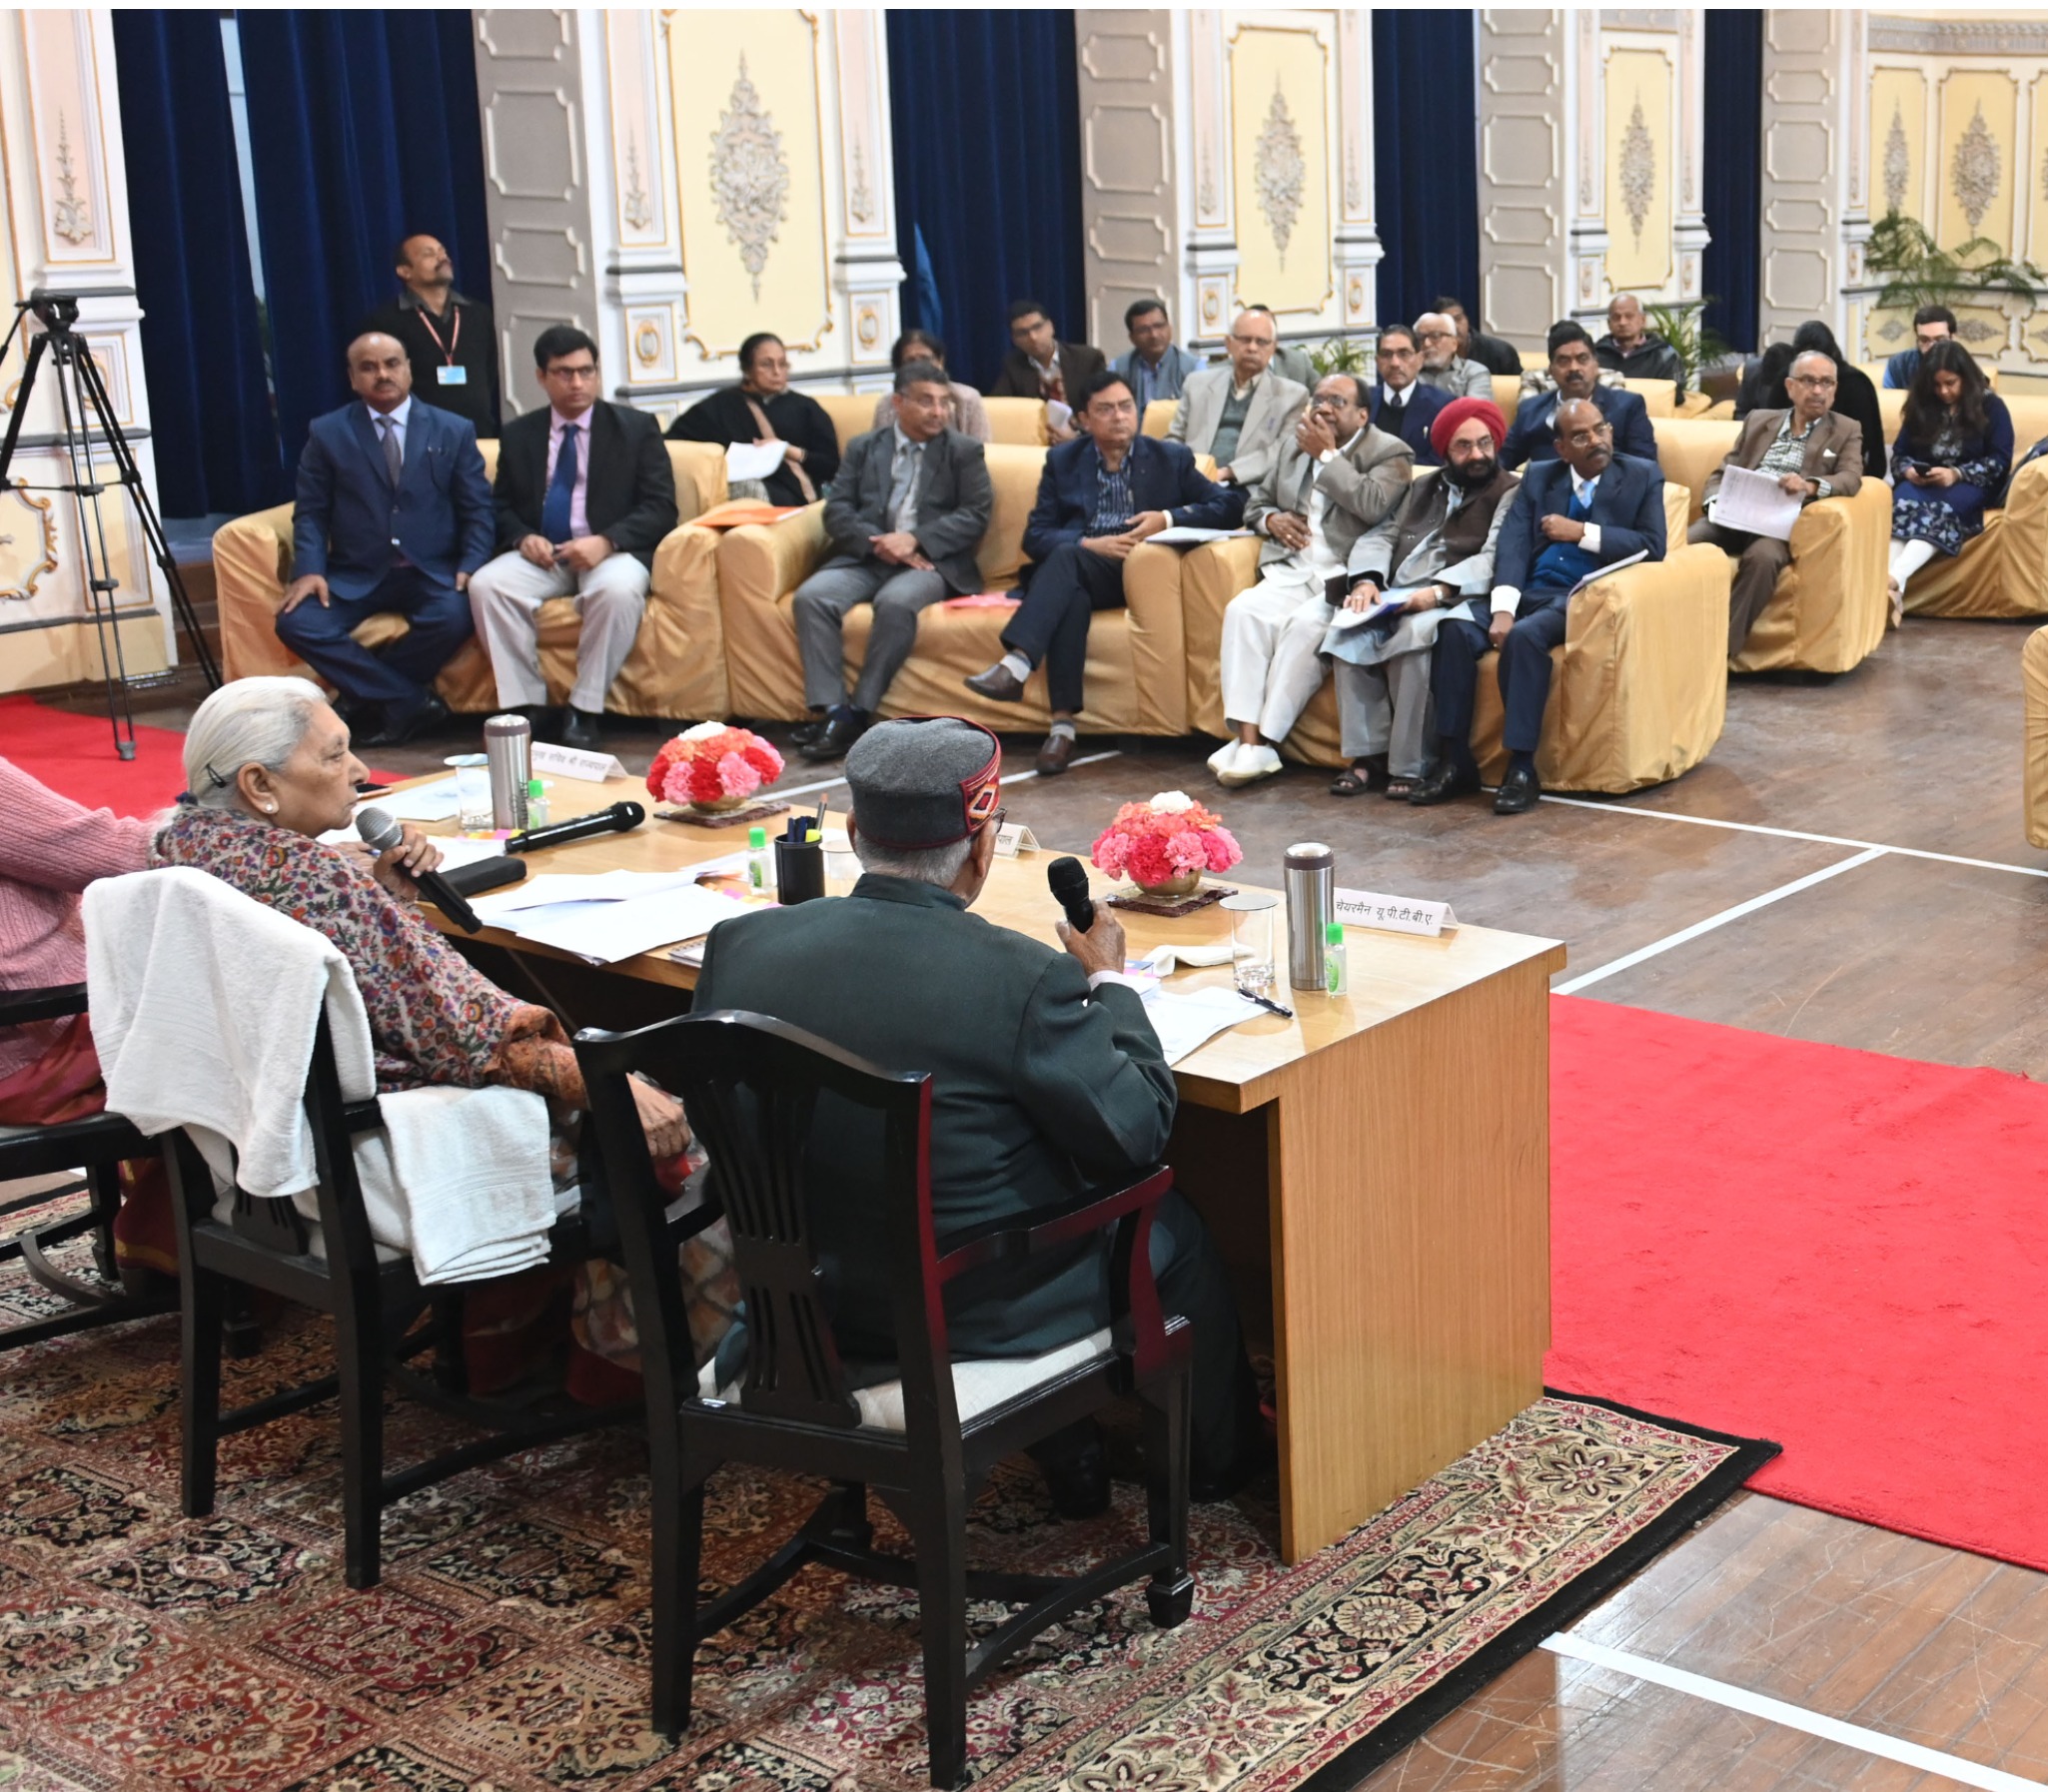 Meeting of Uttar Pradesh Tuberculosis Association held under the chairpersonship of the Governor.